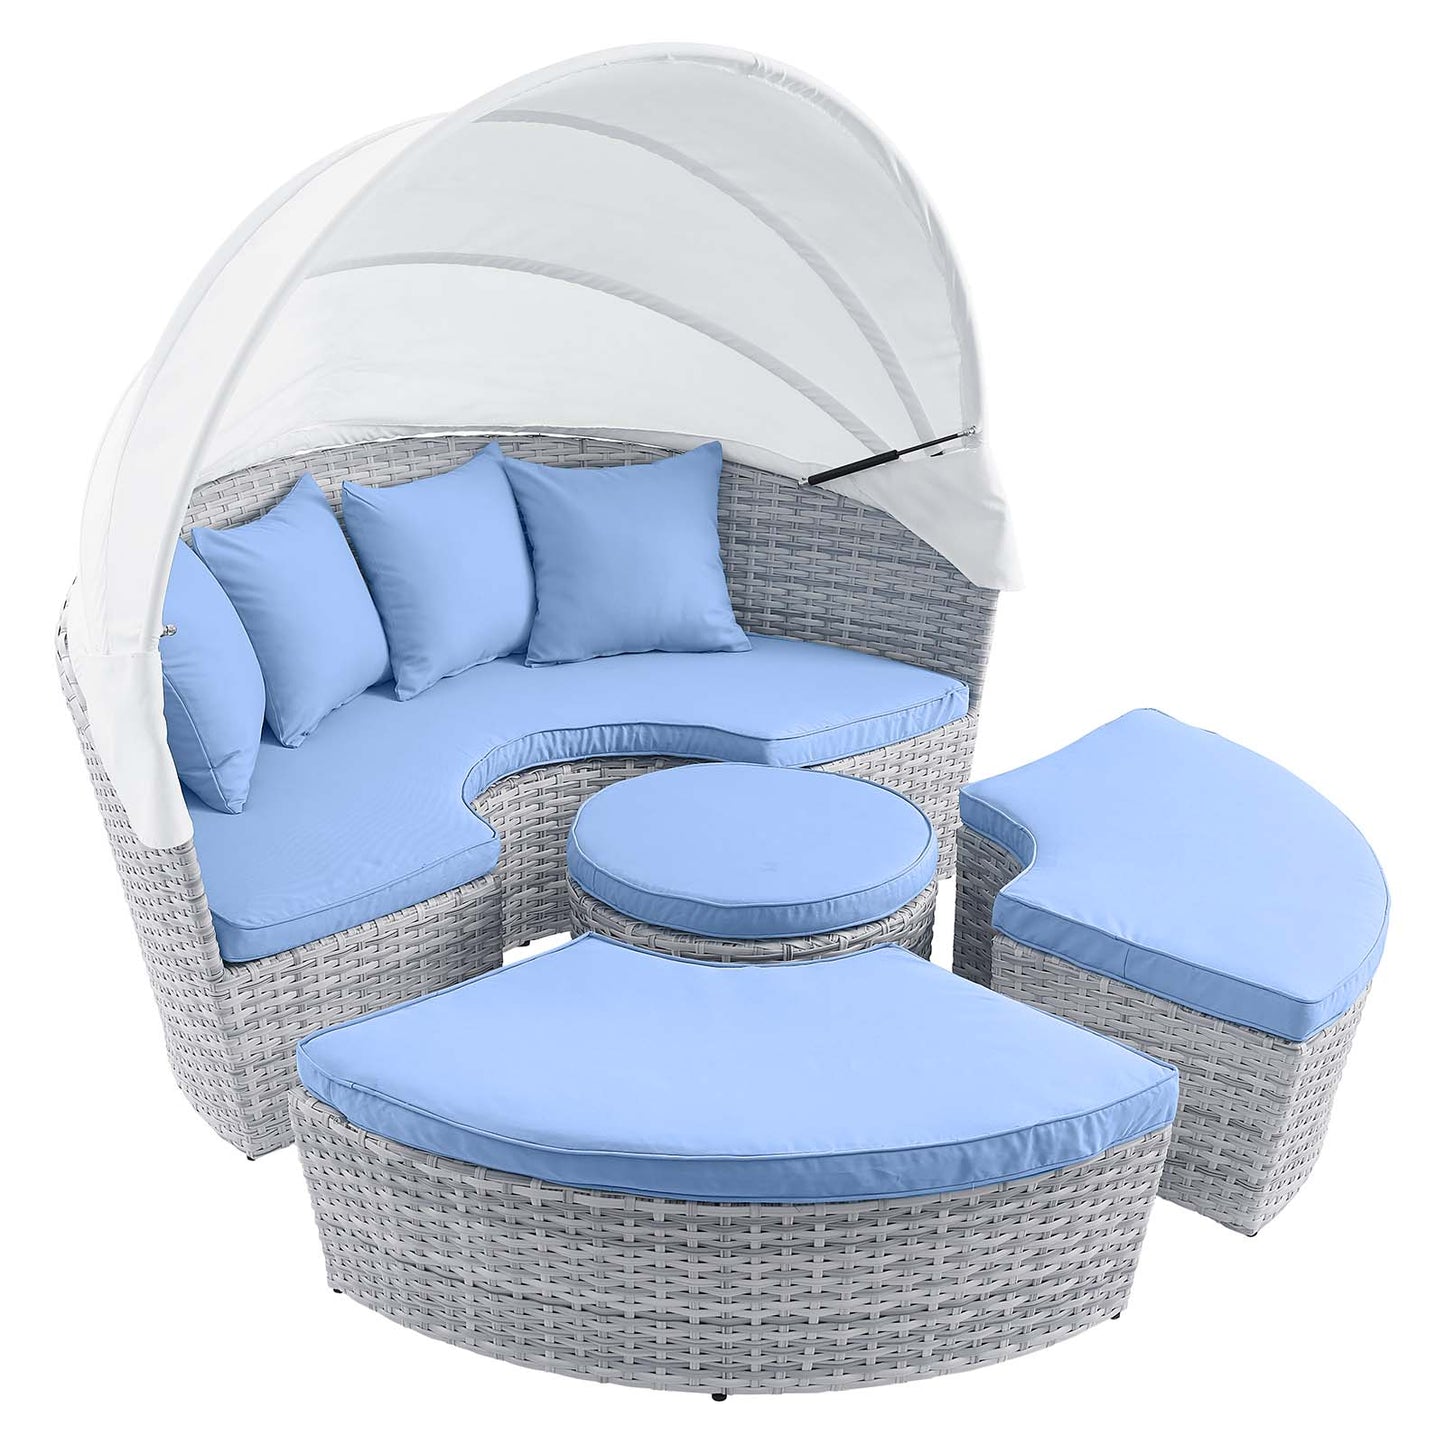 Scottsdale Canopy Outdoor Patio Daybed Light Gray Light Blue EEI-4442-LGR-LBU